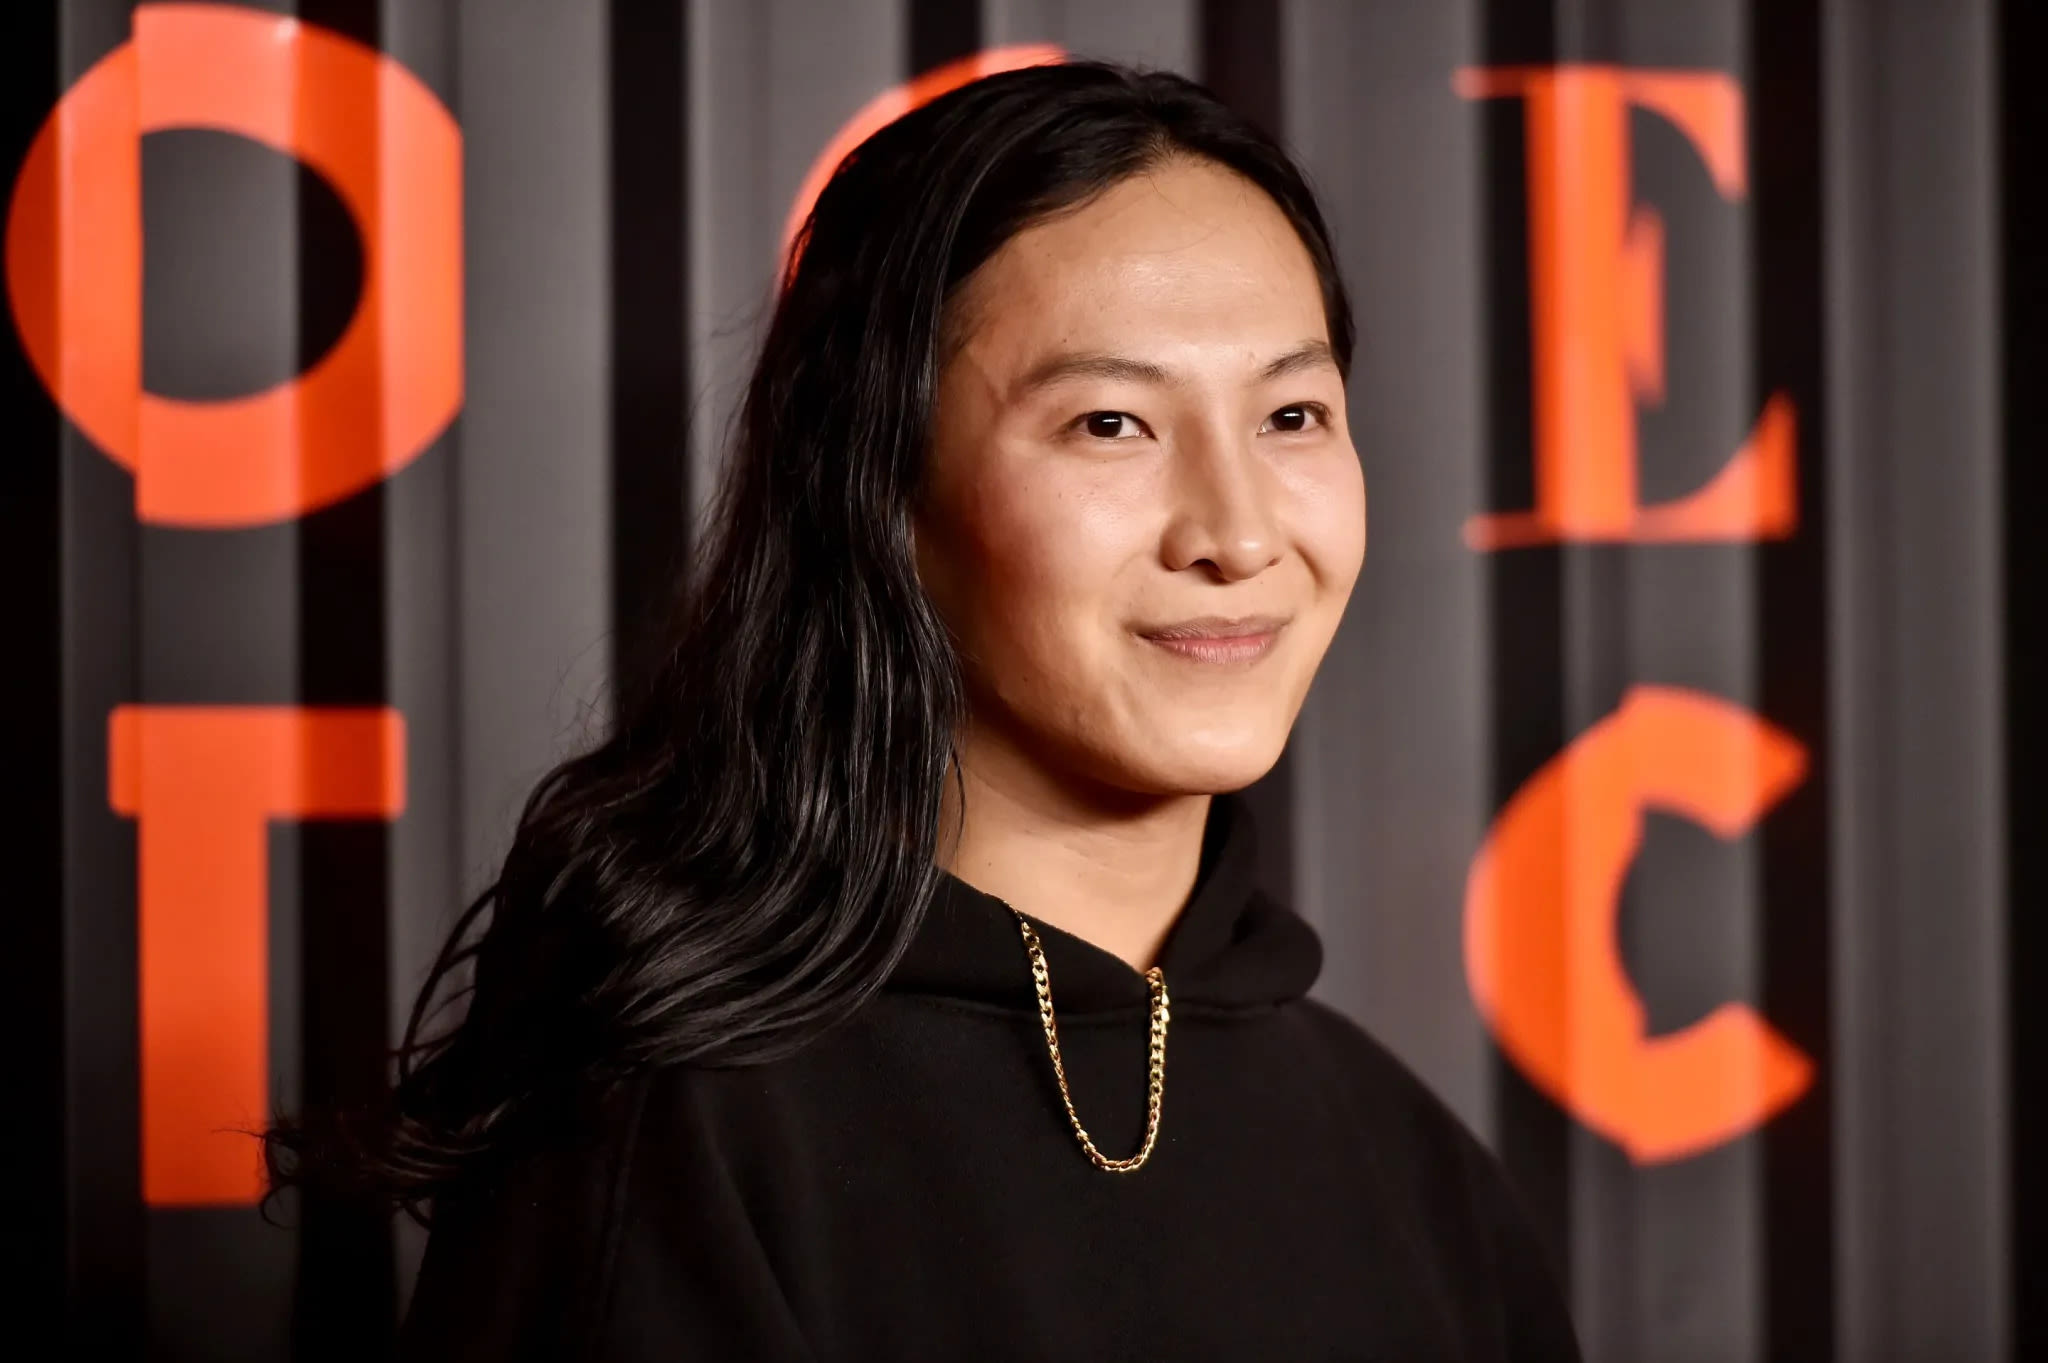 Alexander Wang dropped a wild ad featuring doppelgängers for Taylor Swift, Beyoncé, and Kylie Jenner—’this video is diabolical’